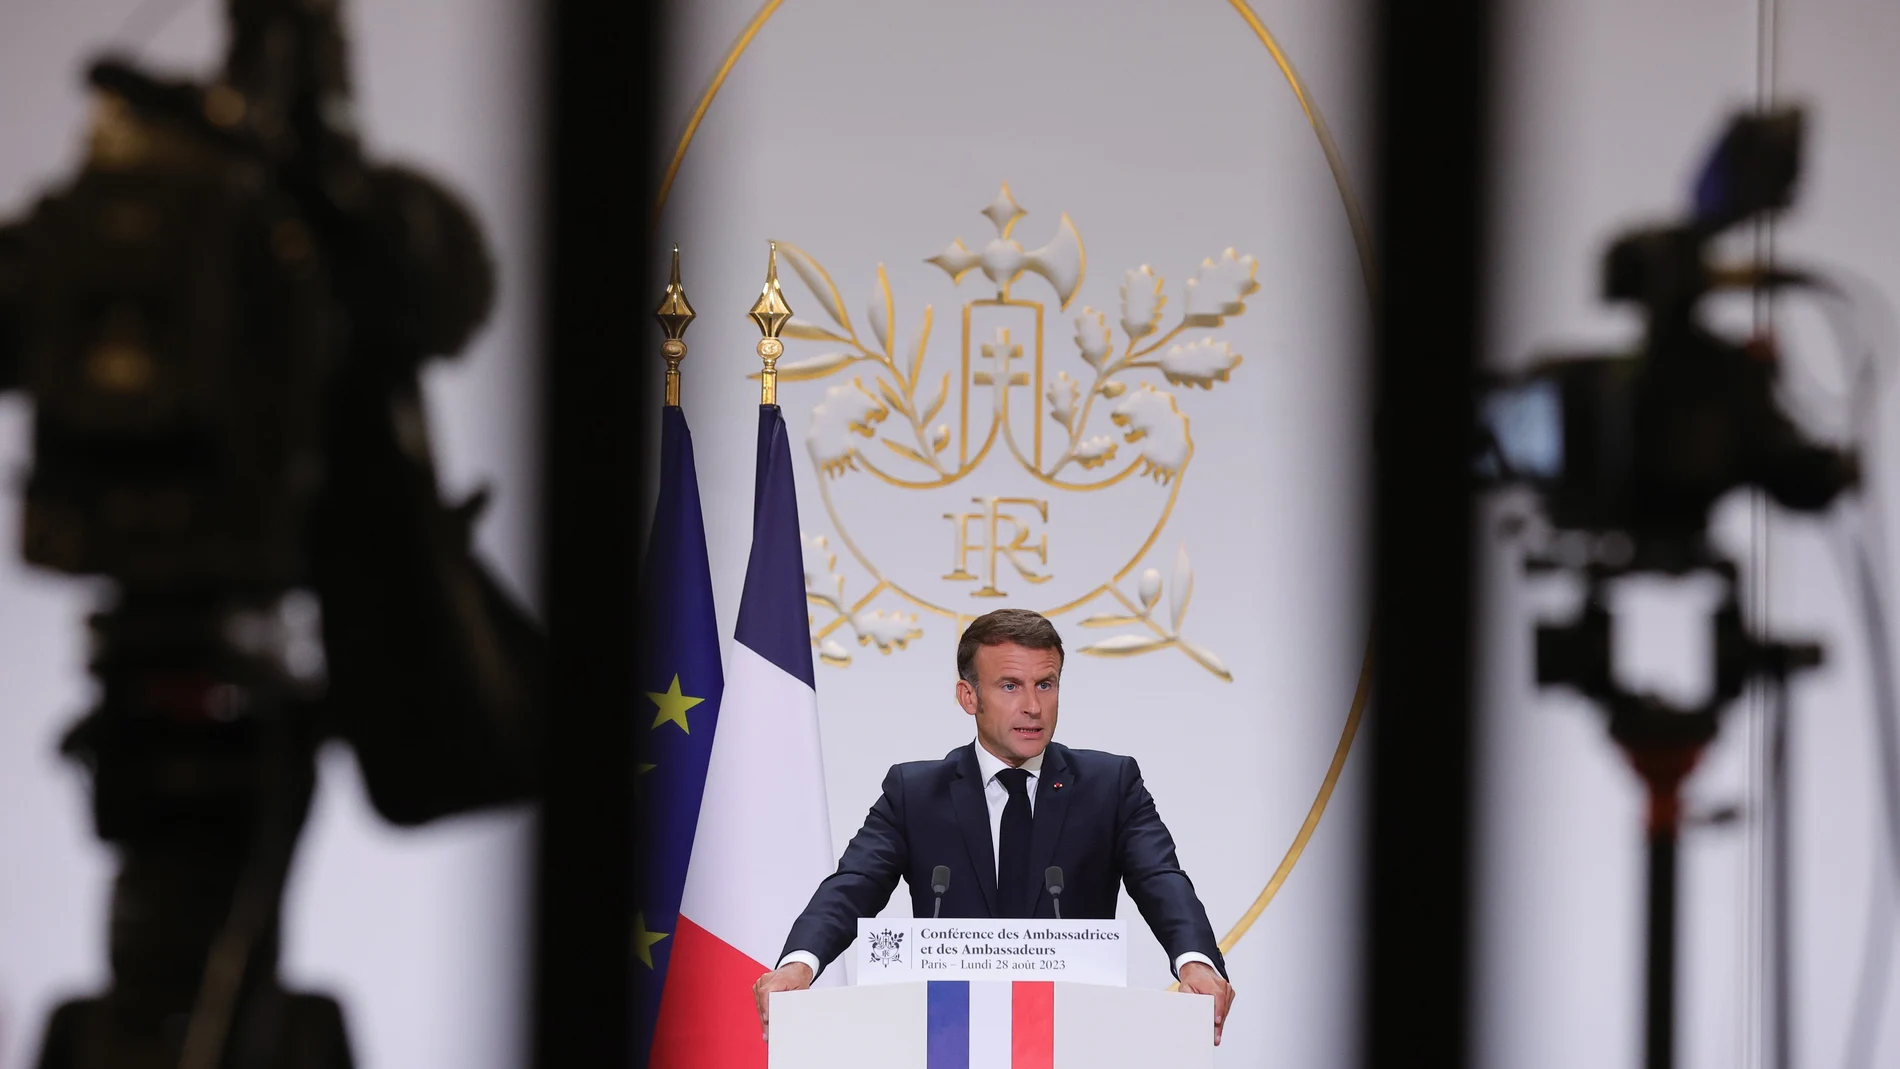 French President Emmanuel Macron speaks in front of French ambassadors during the conference of ambassadors at the Elysee Palace, Paris, France, 28 August 2023. Macron is expected to highlight France's foreign policy during the annual ambassadors' conference.